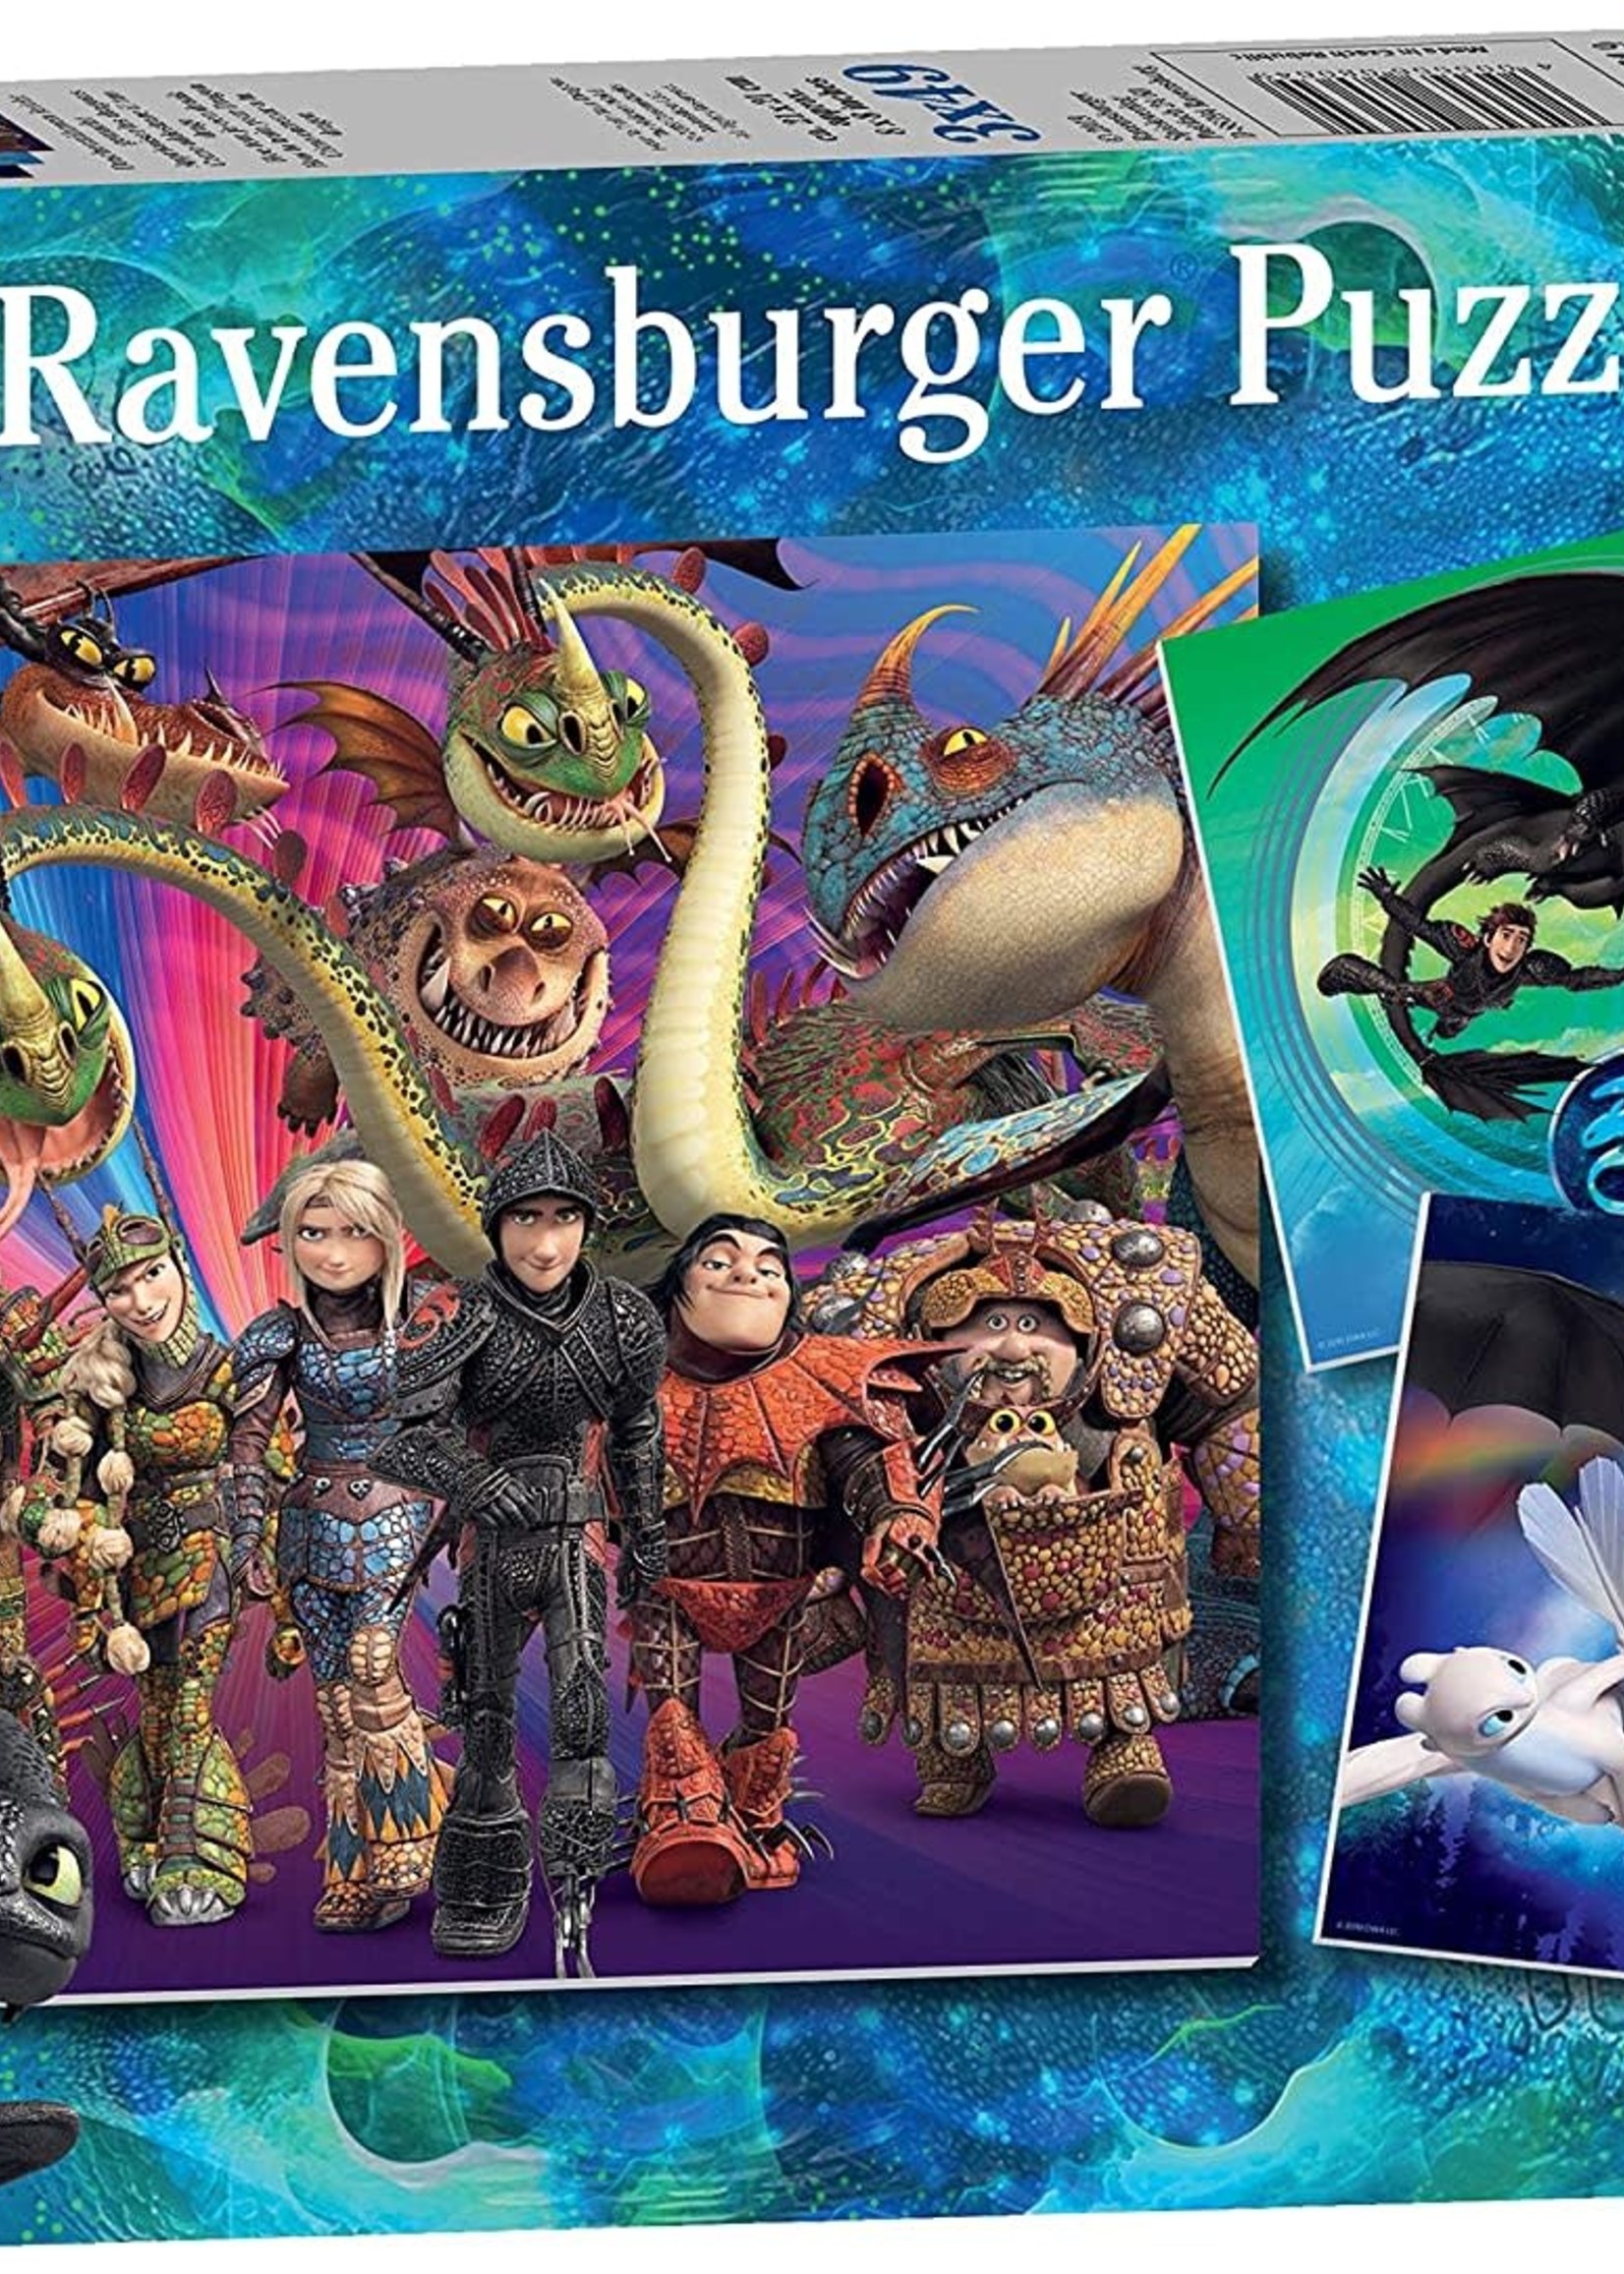 Ravensburger Puzzle Ravensburger 3x49 - How to train your dragon